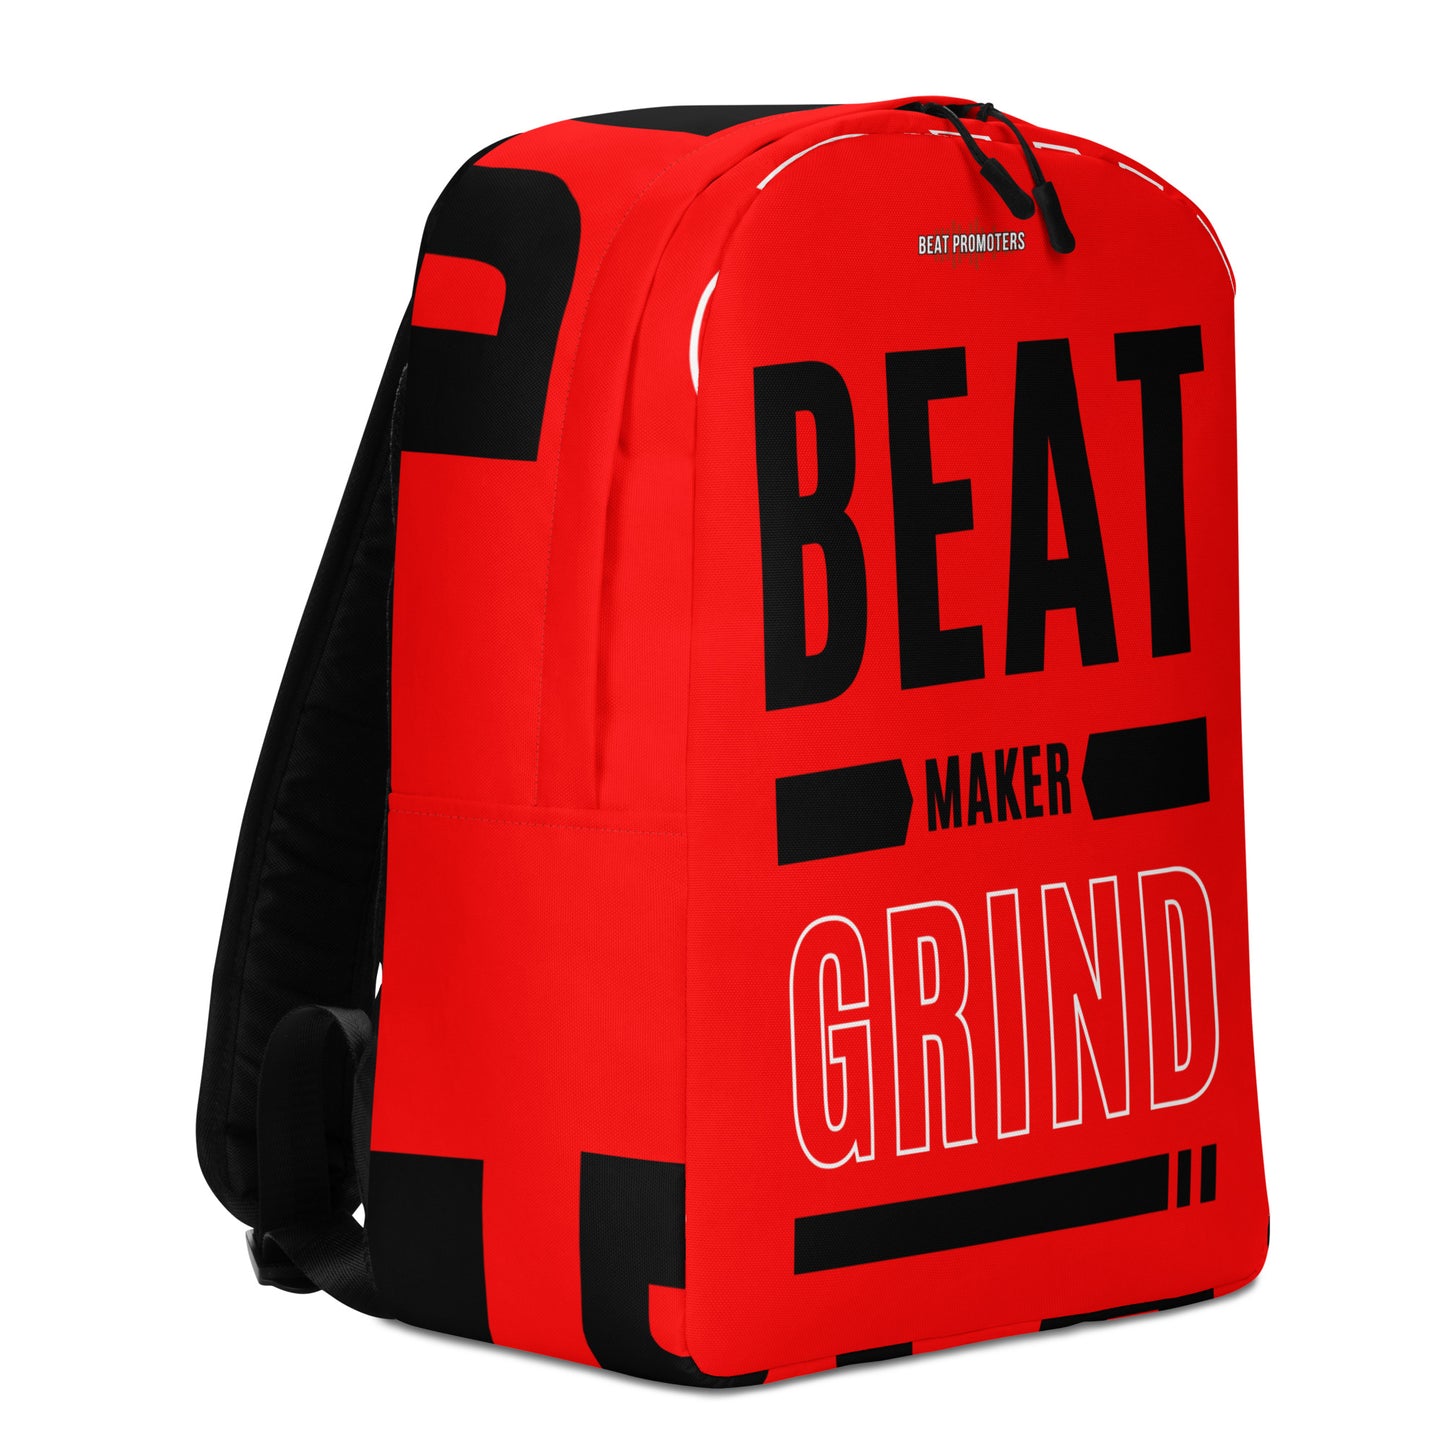 Beatmaker Laptop / Drum Machine and Accessories Backpack - Red